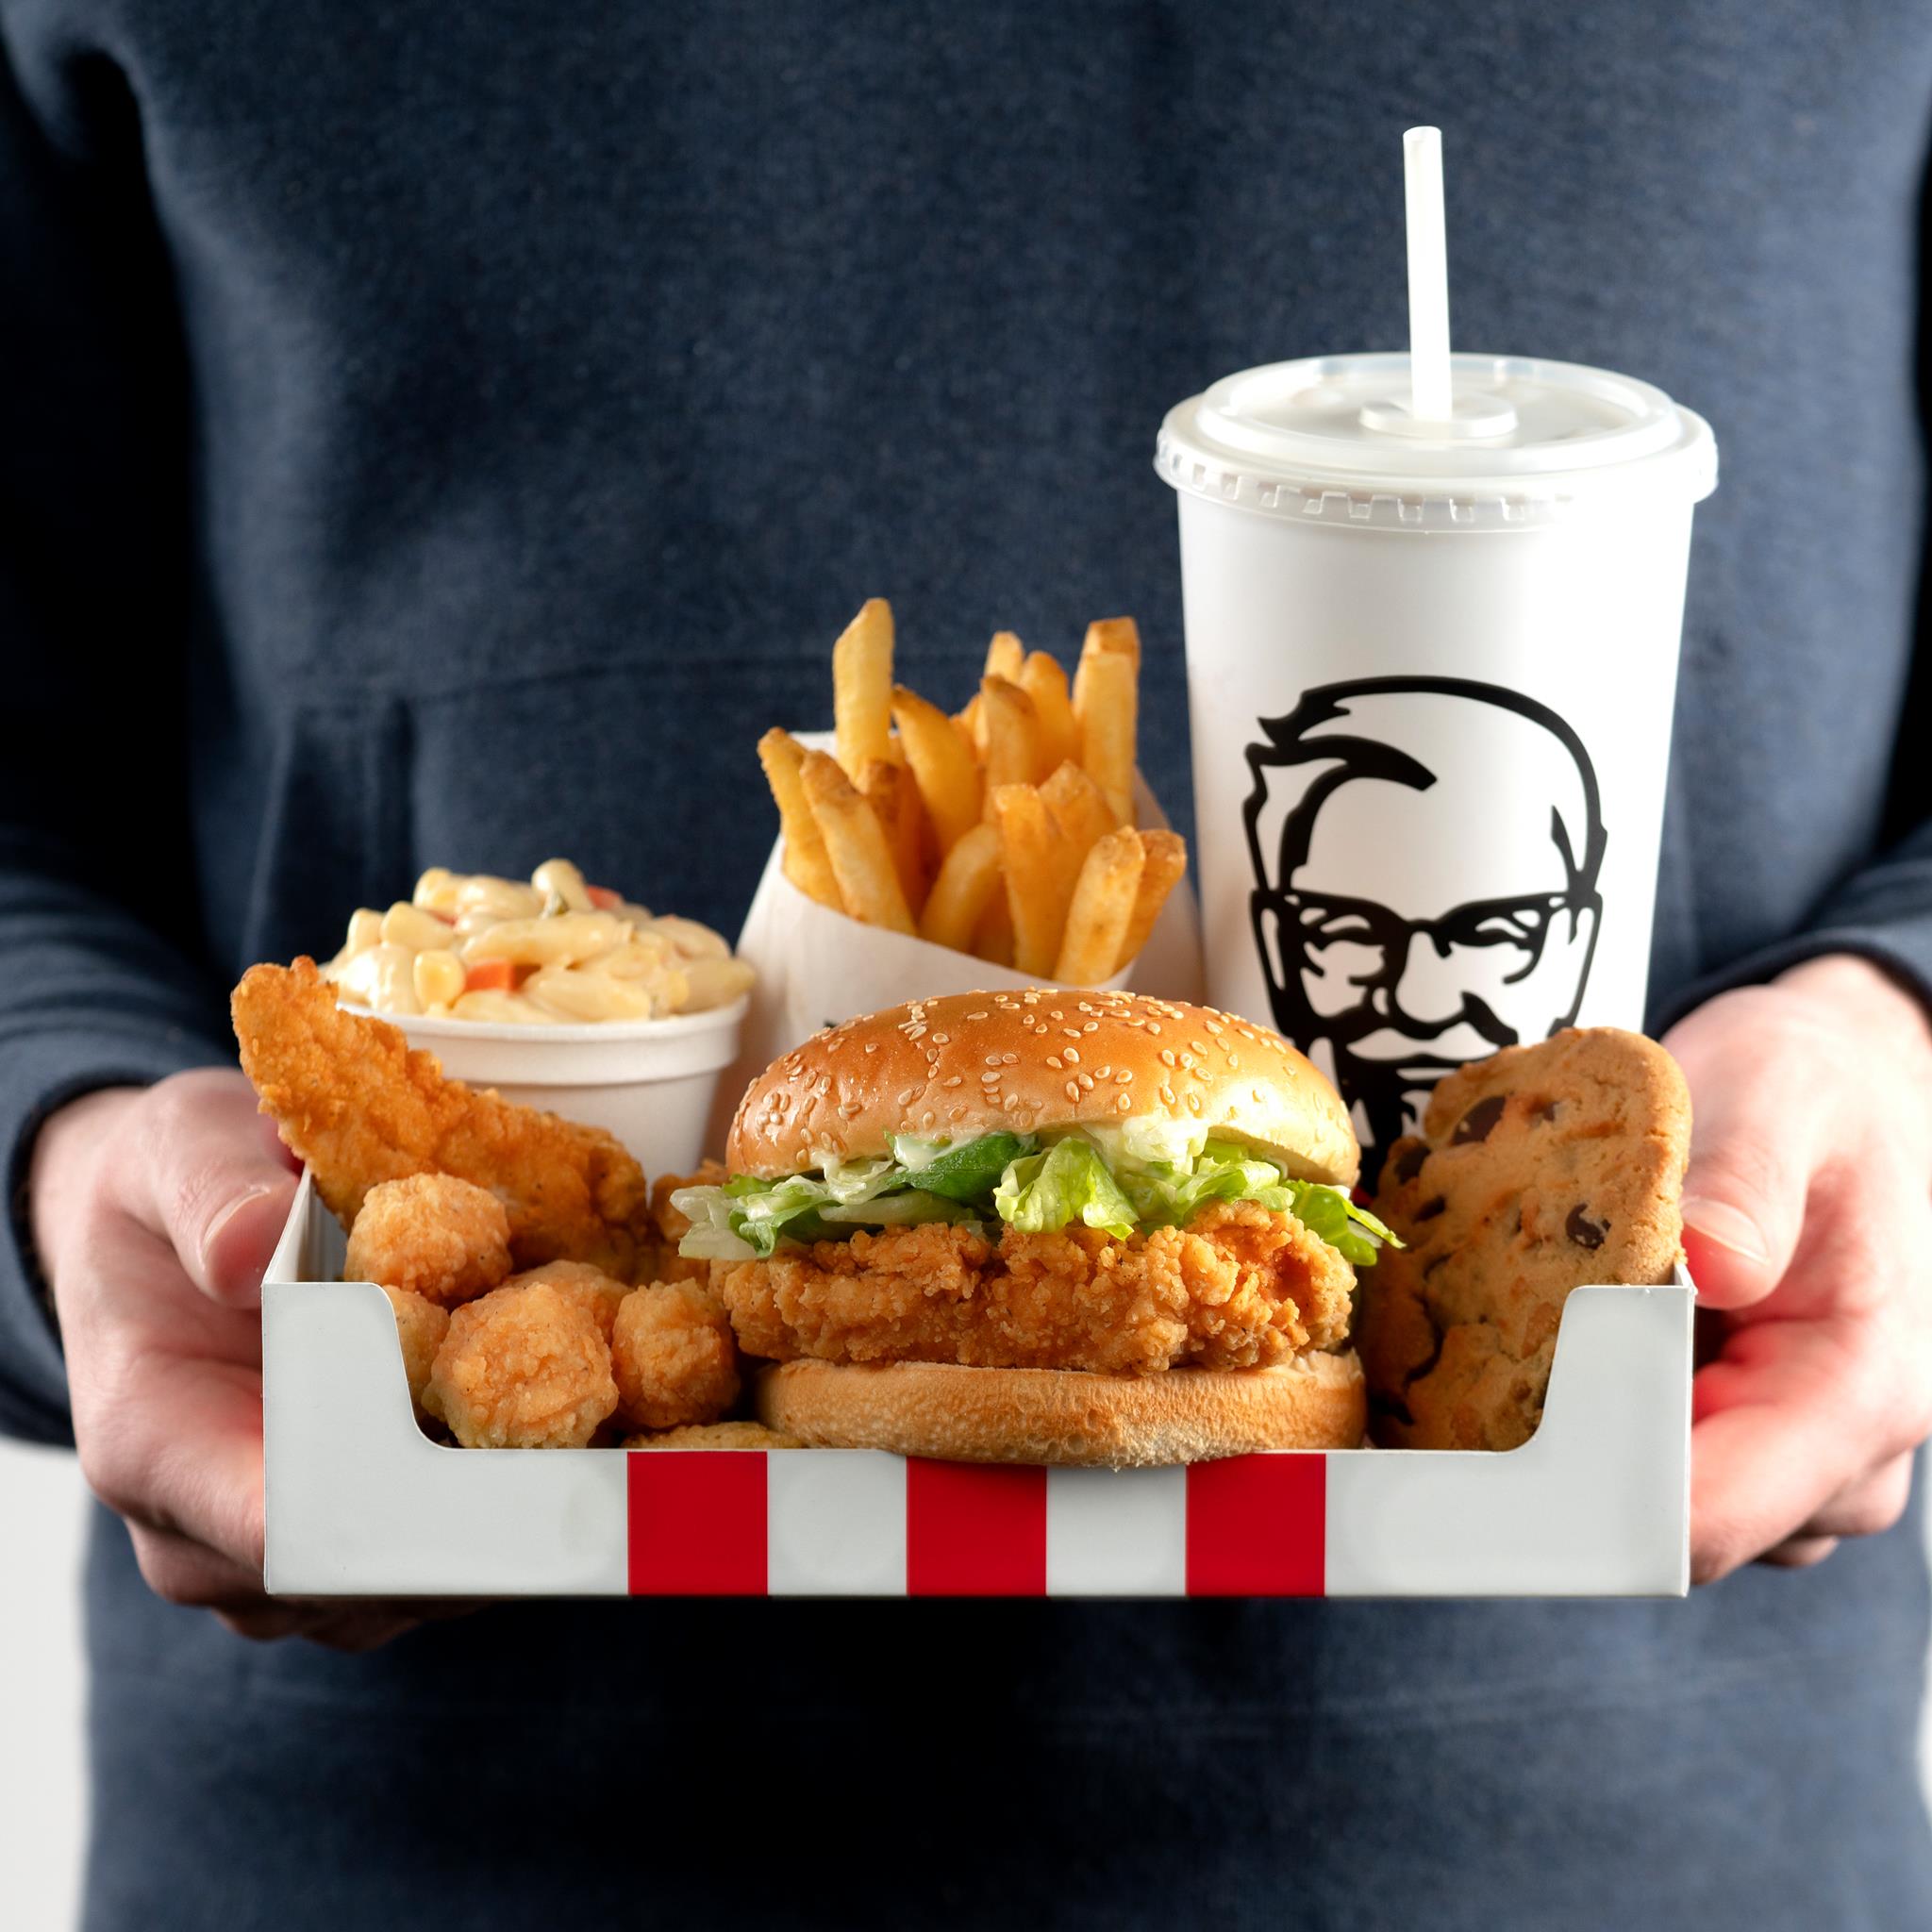 kfc-canada-new-trilogy-box-meal-8-piece-fries-for-14-99-canadian